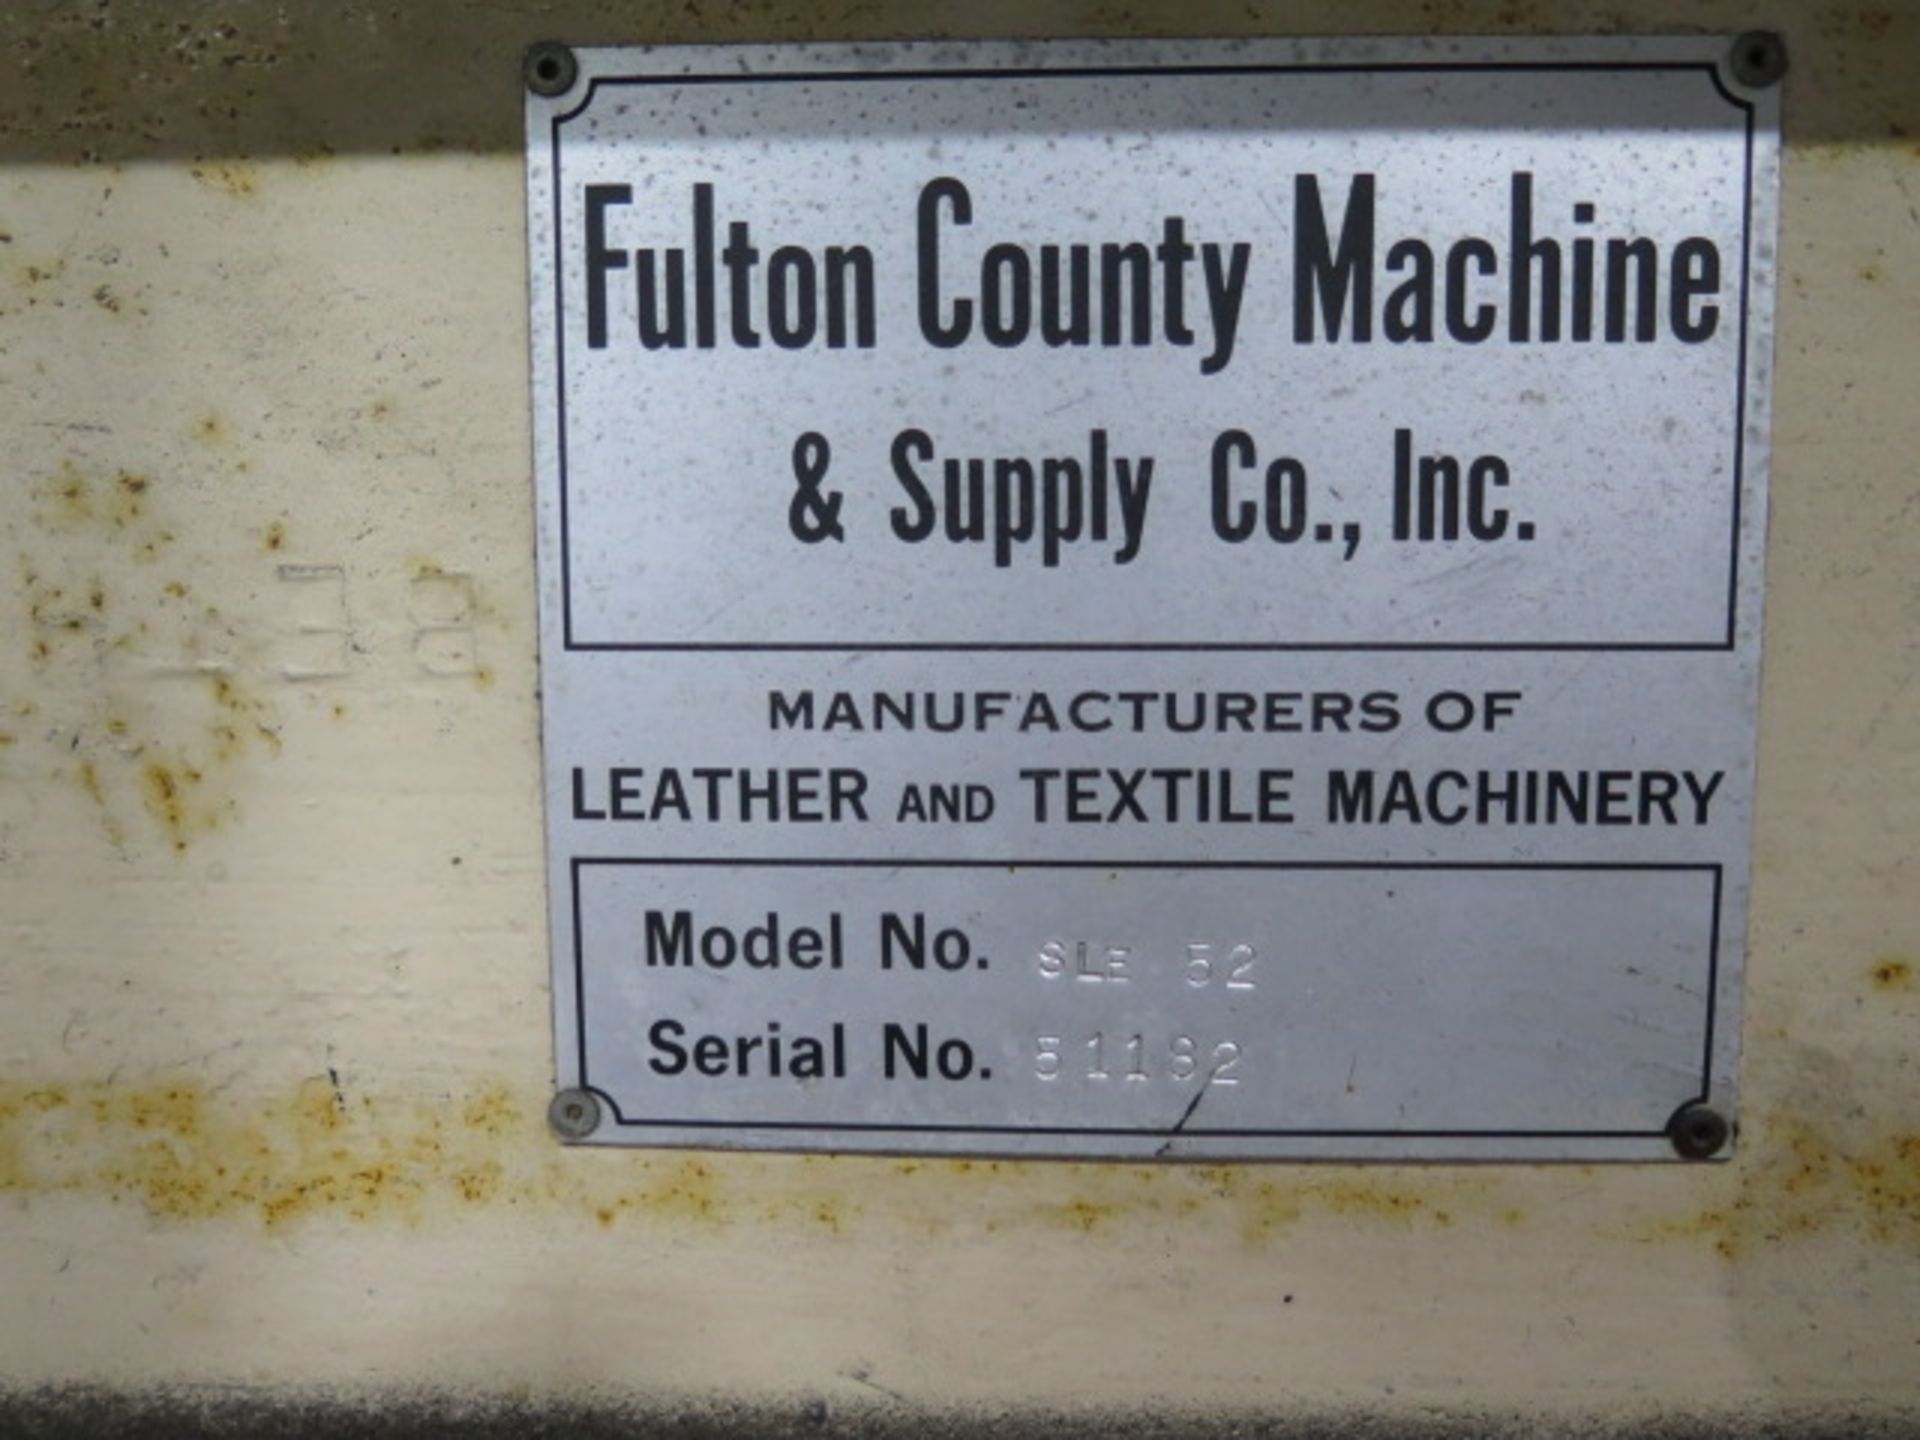 Fulton County Machine mdl. SLE52 52” Roller Embossing Machine s/n 51182 (SOLD AS-IS - NO WARRANTY) - Image 10 of 10